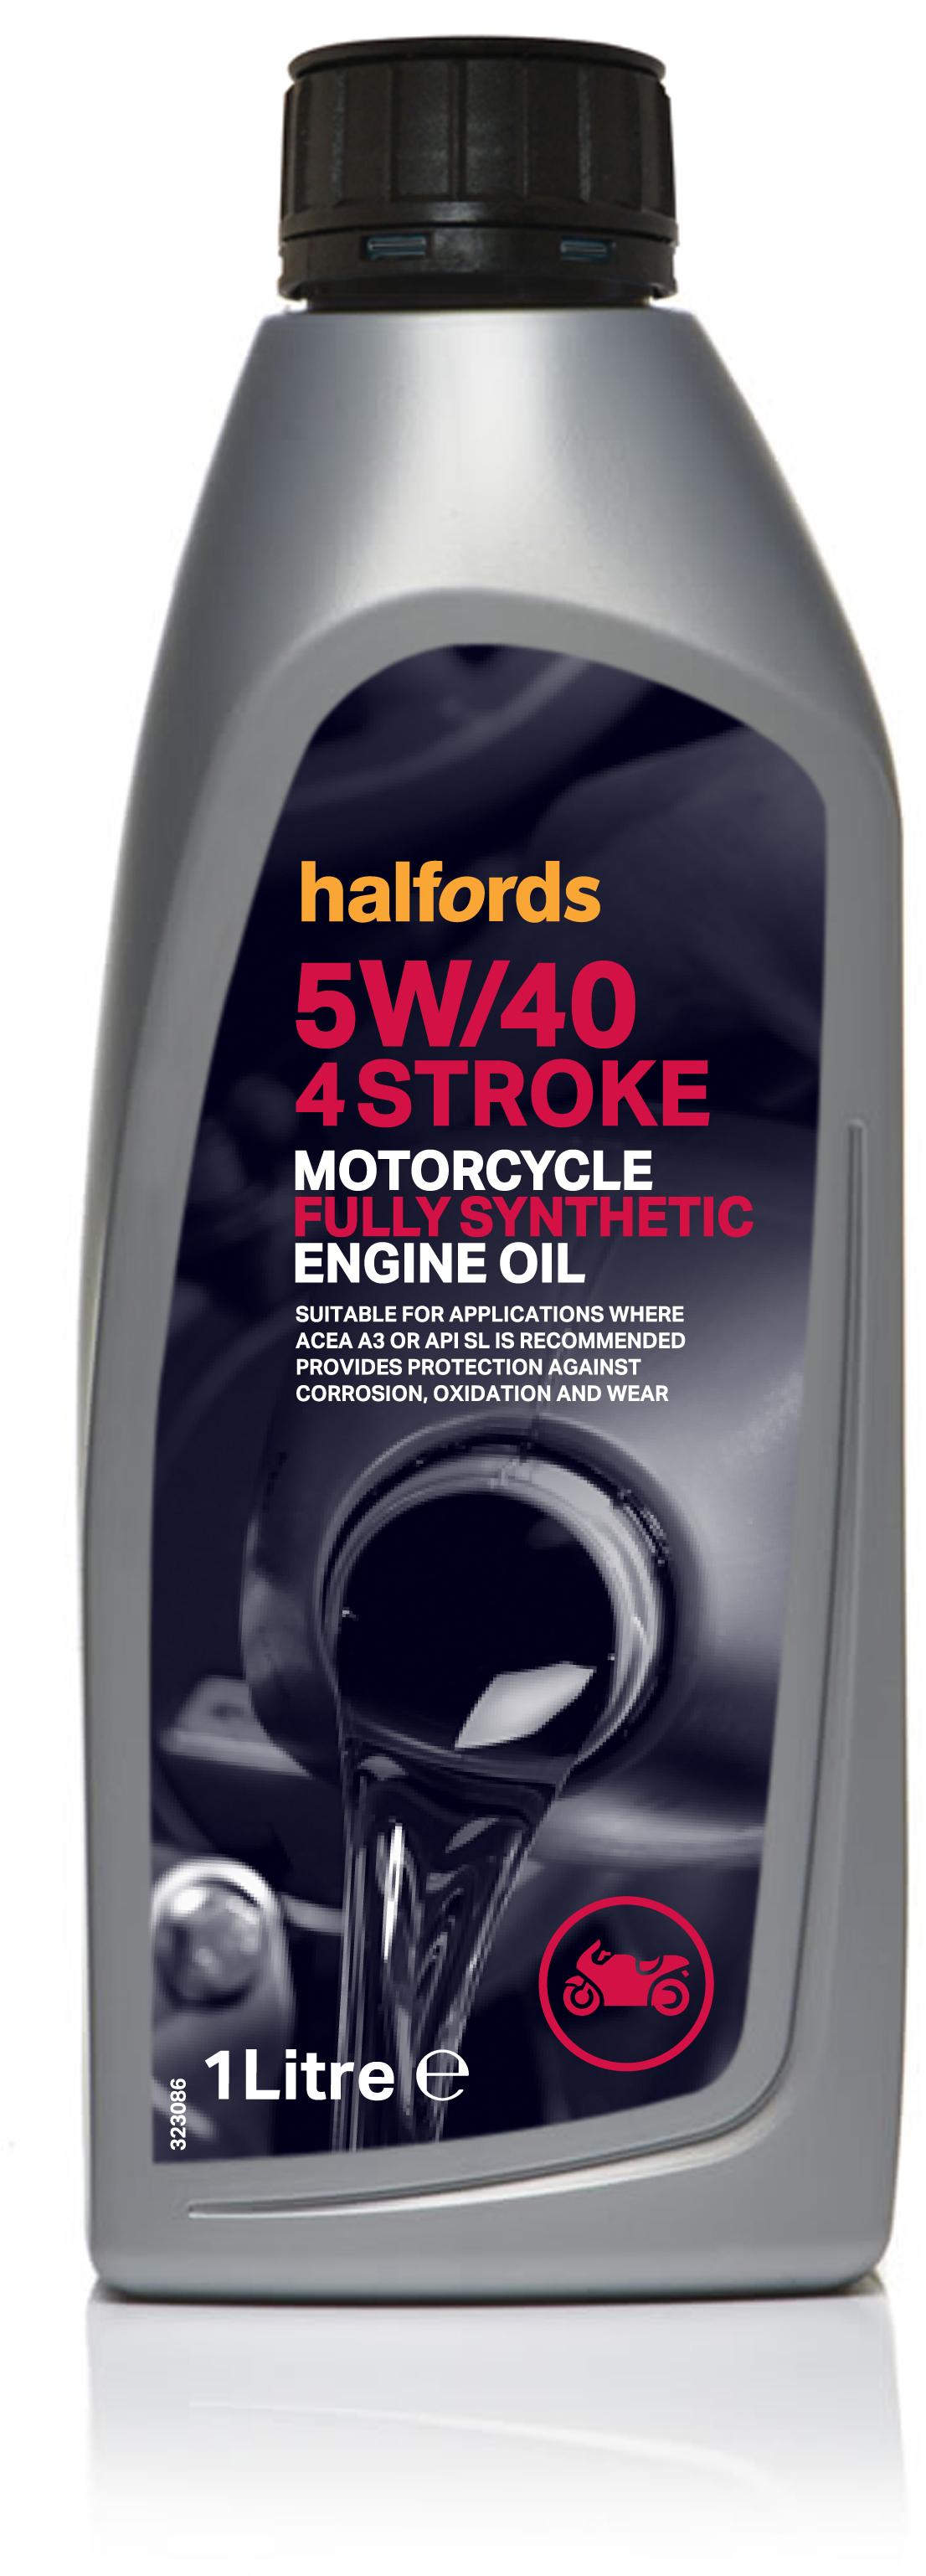 Halfords Motorcycle Engine Oil Fully Synthetic 5W/40 4 Stroke 1L